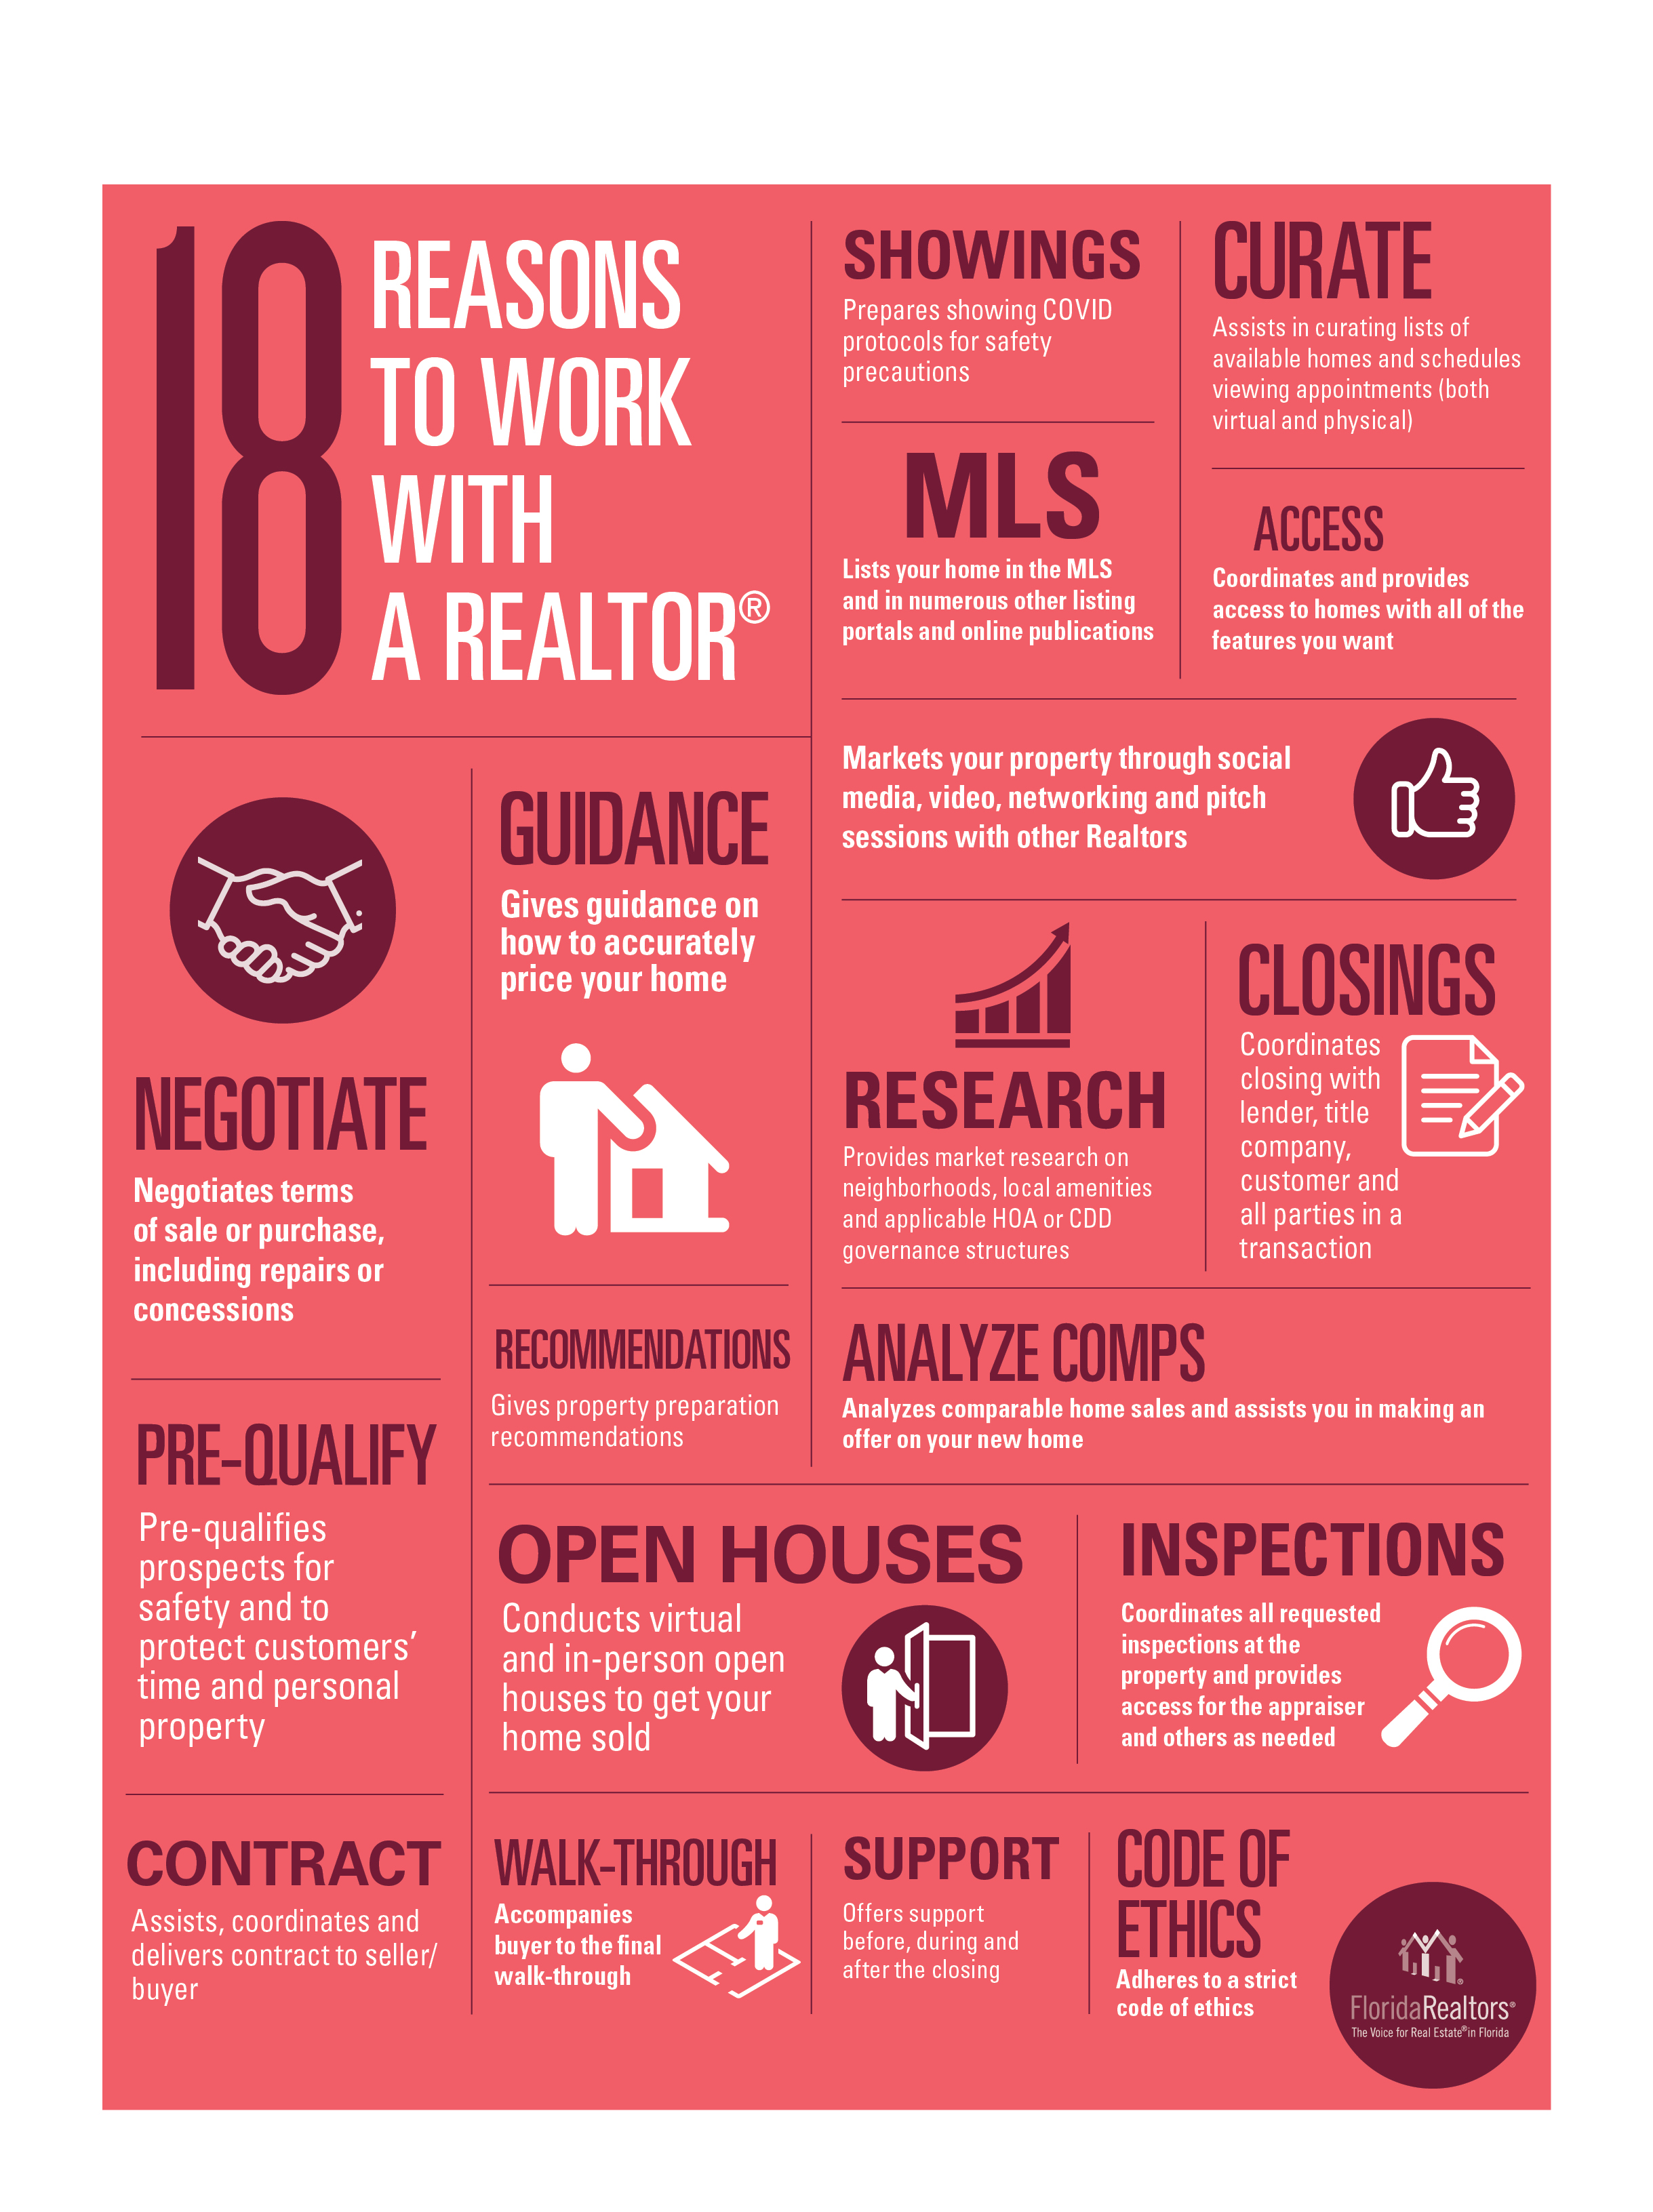 18 Reasons to Work With a Realtor